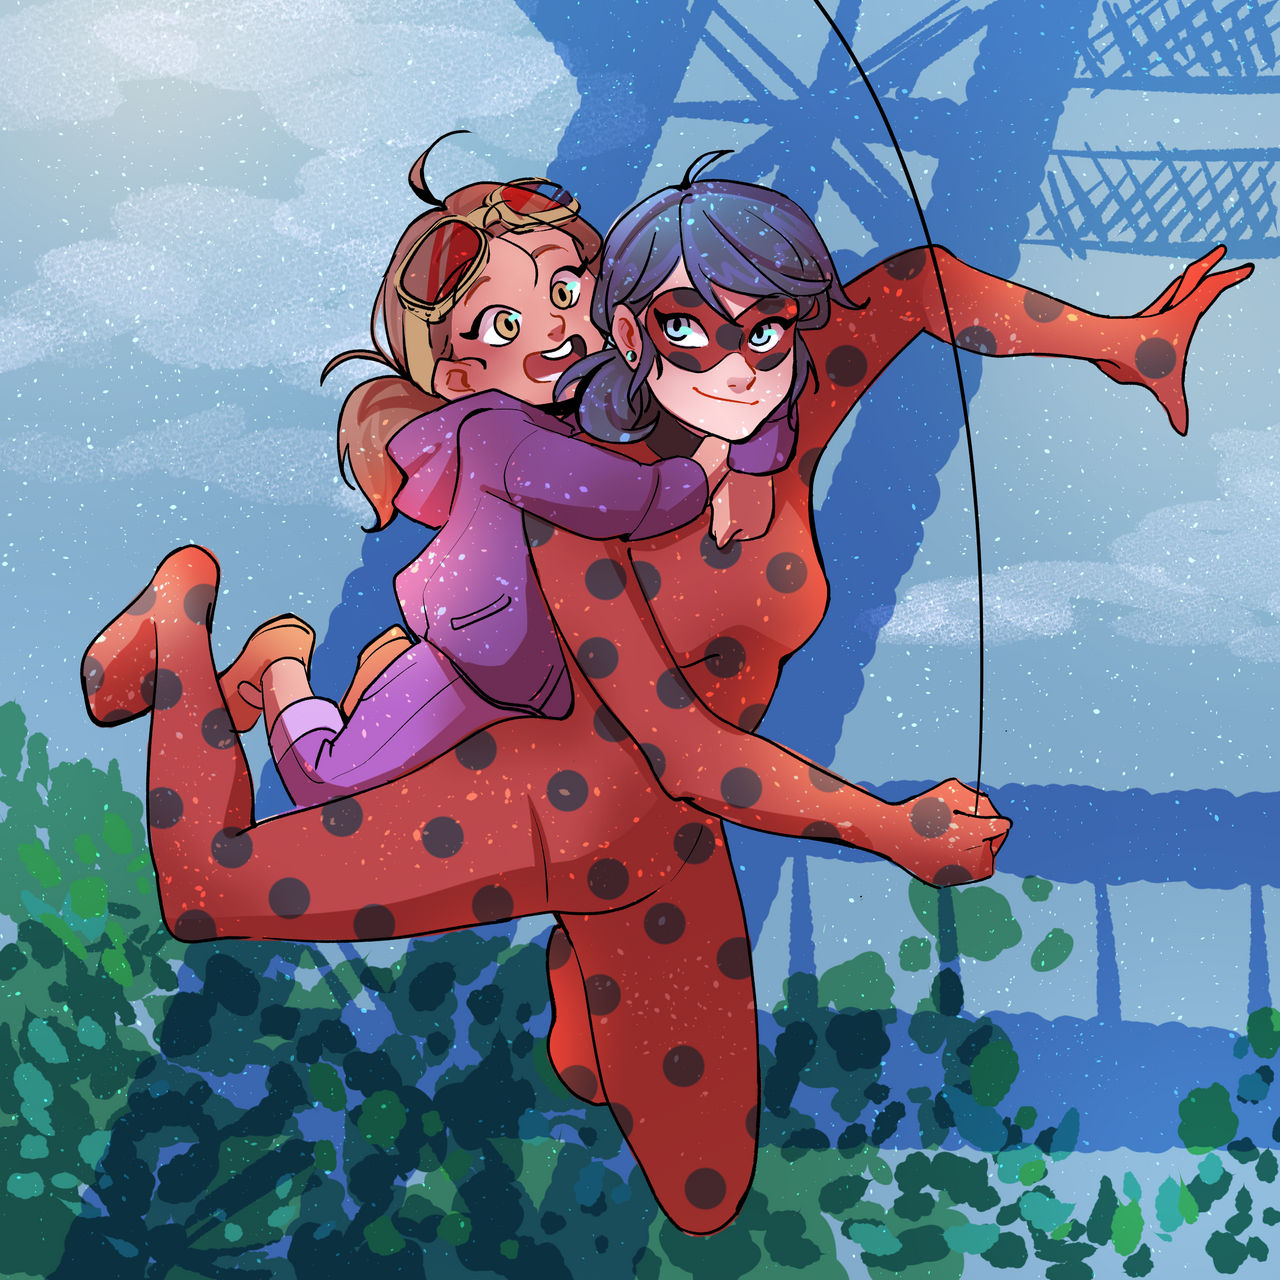 Miraculous Ladybug by Insomniac Games by sonicfighter on DeviantArt